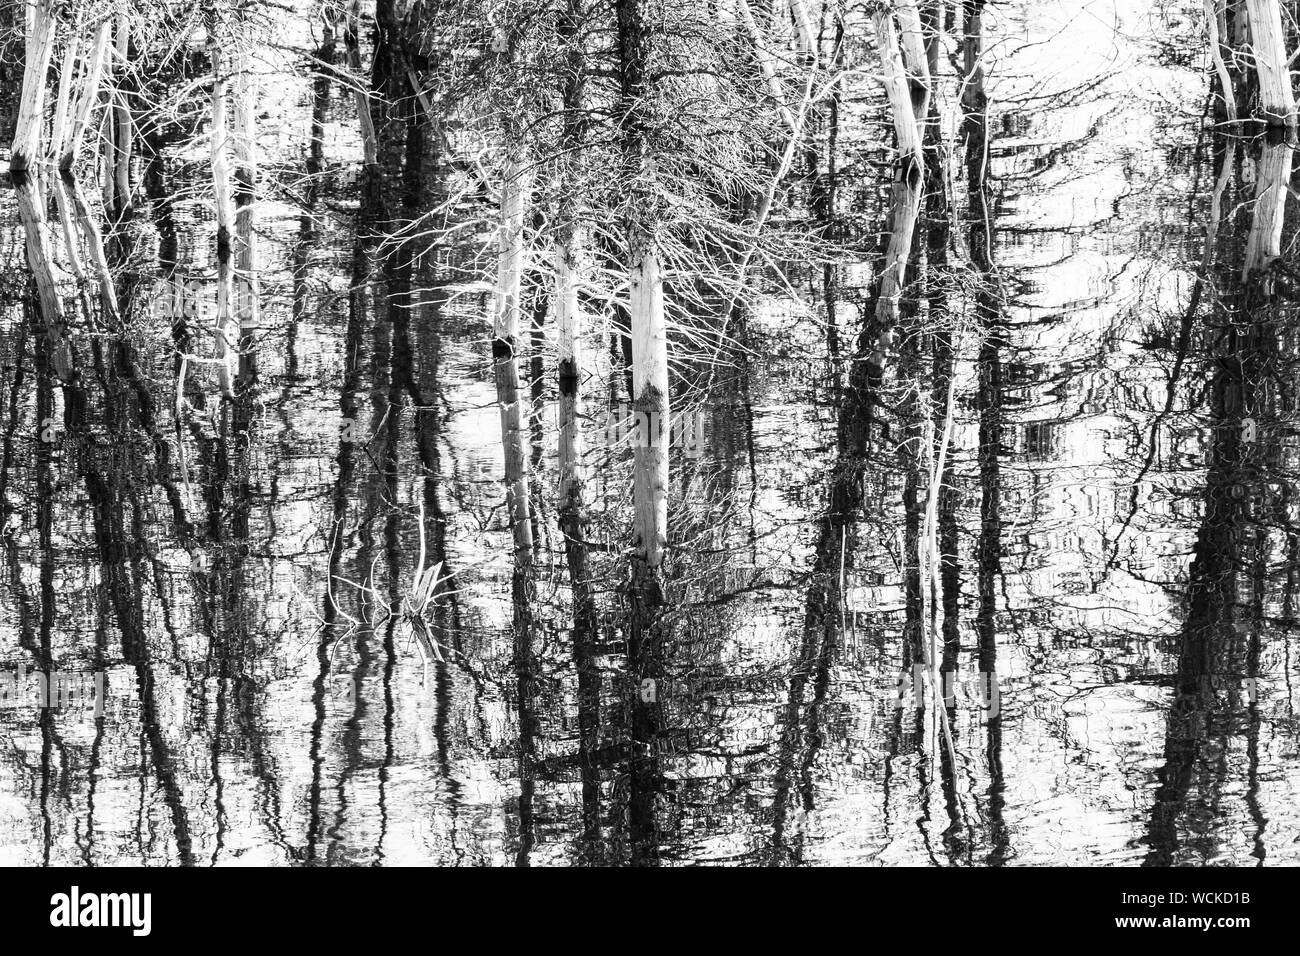 Fine Art image of dead tree stumps reflected and shown in black and white. Stock Photo